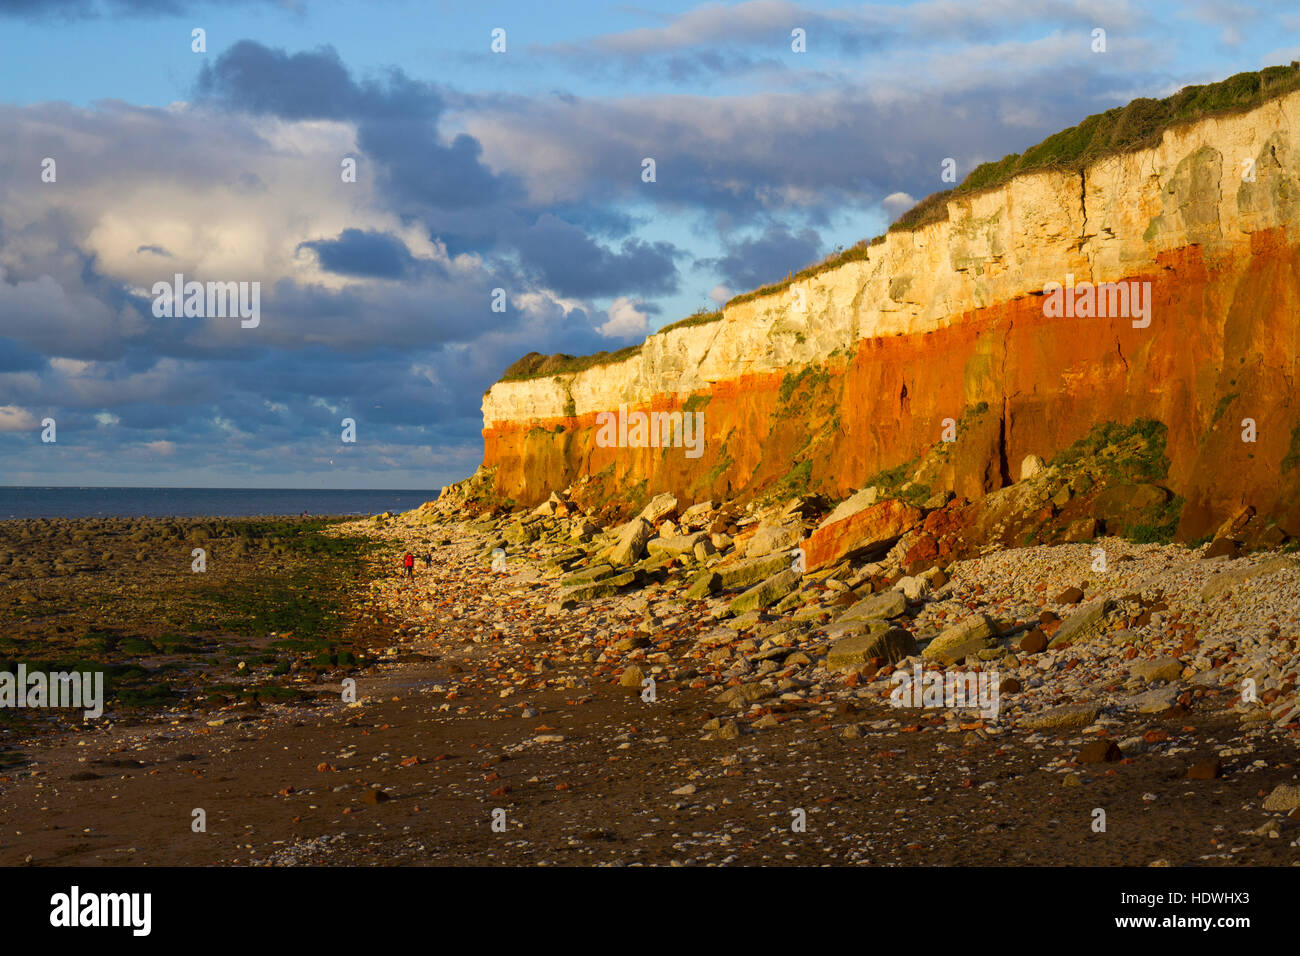 View of chalk and carrstone sea cliffs, Hunstanton, Norfolk, England. October. Stock Photo